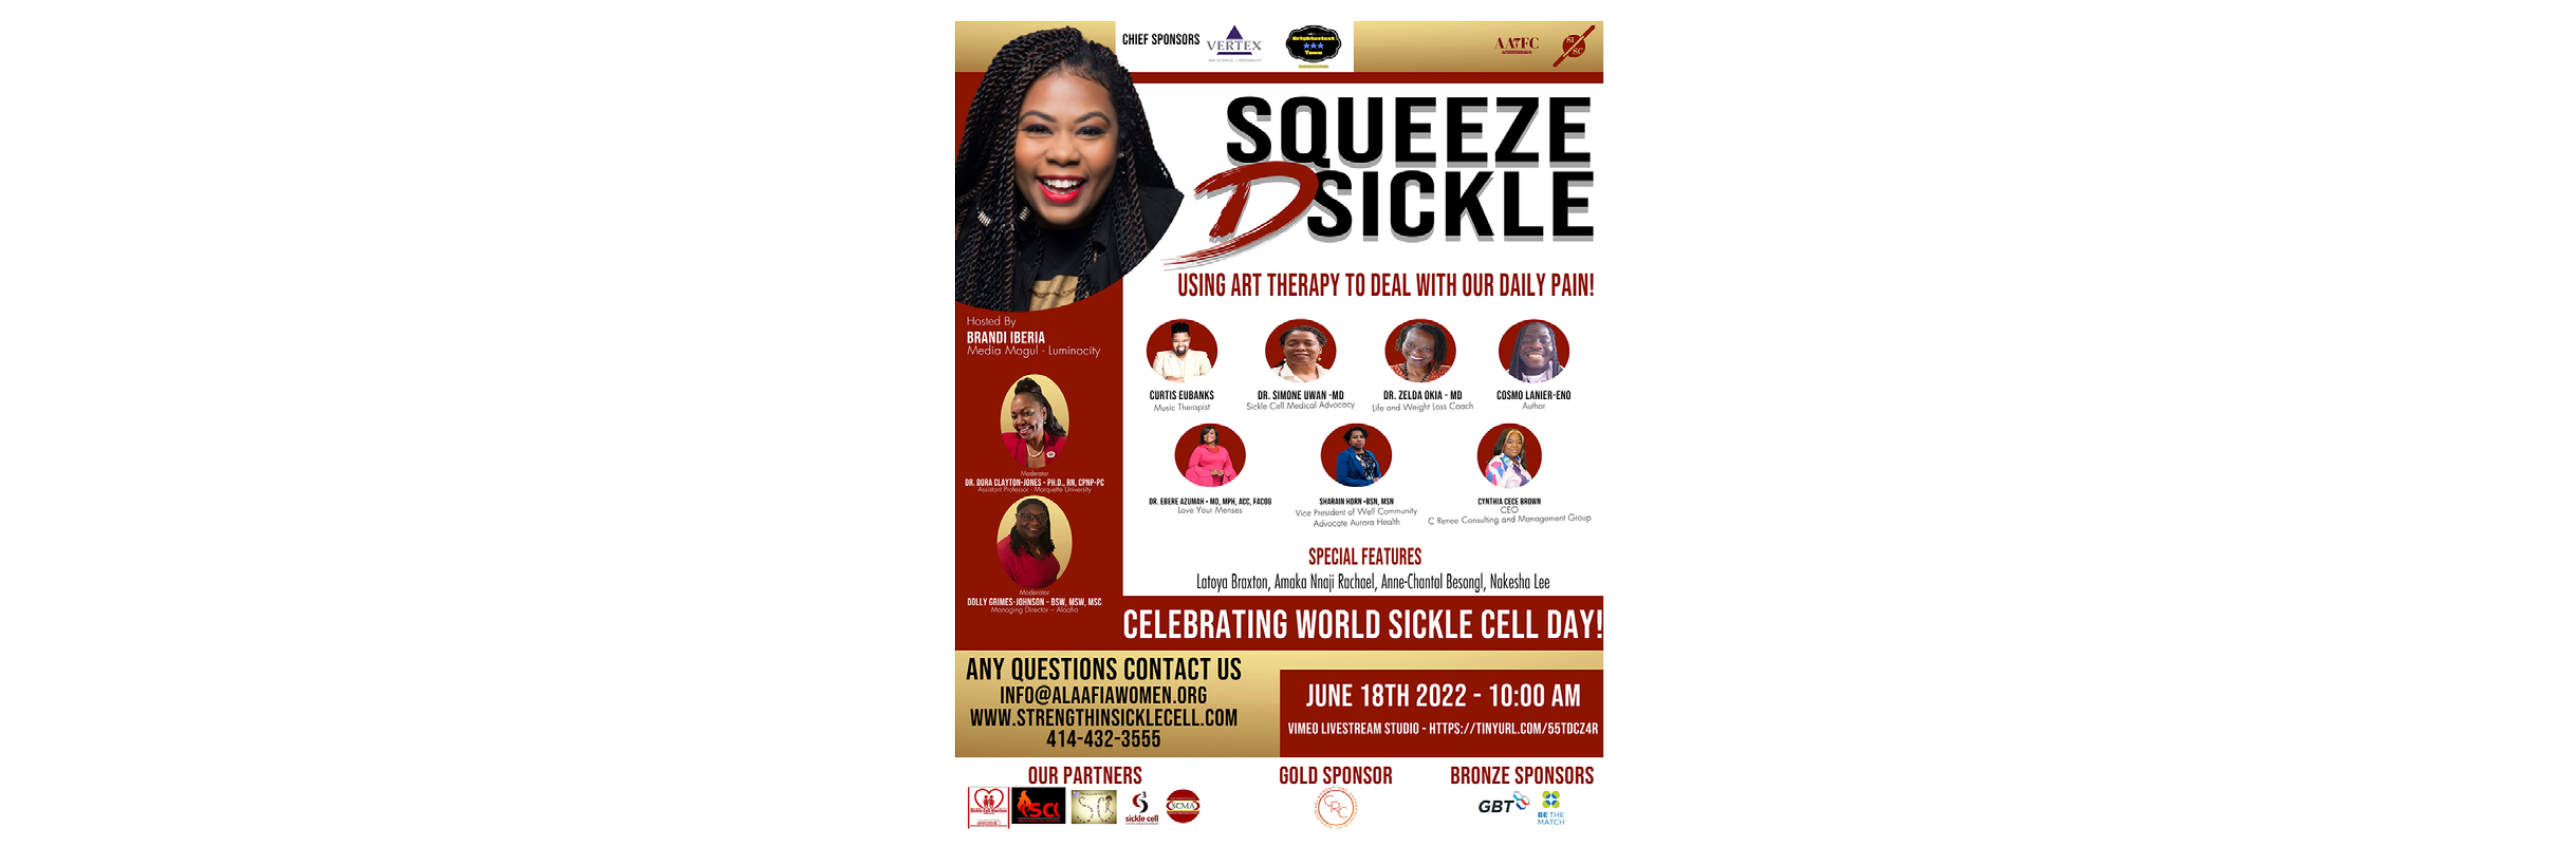 Squeeze D Sickle Event - 2022